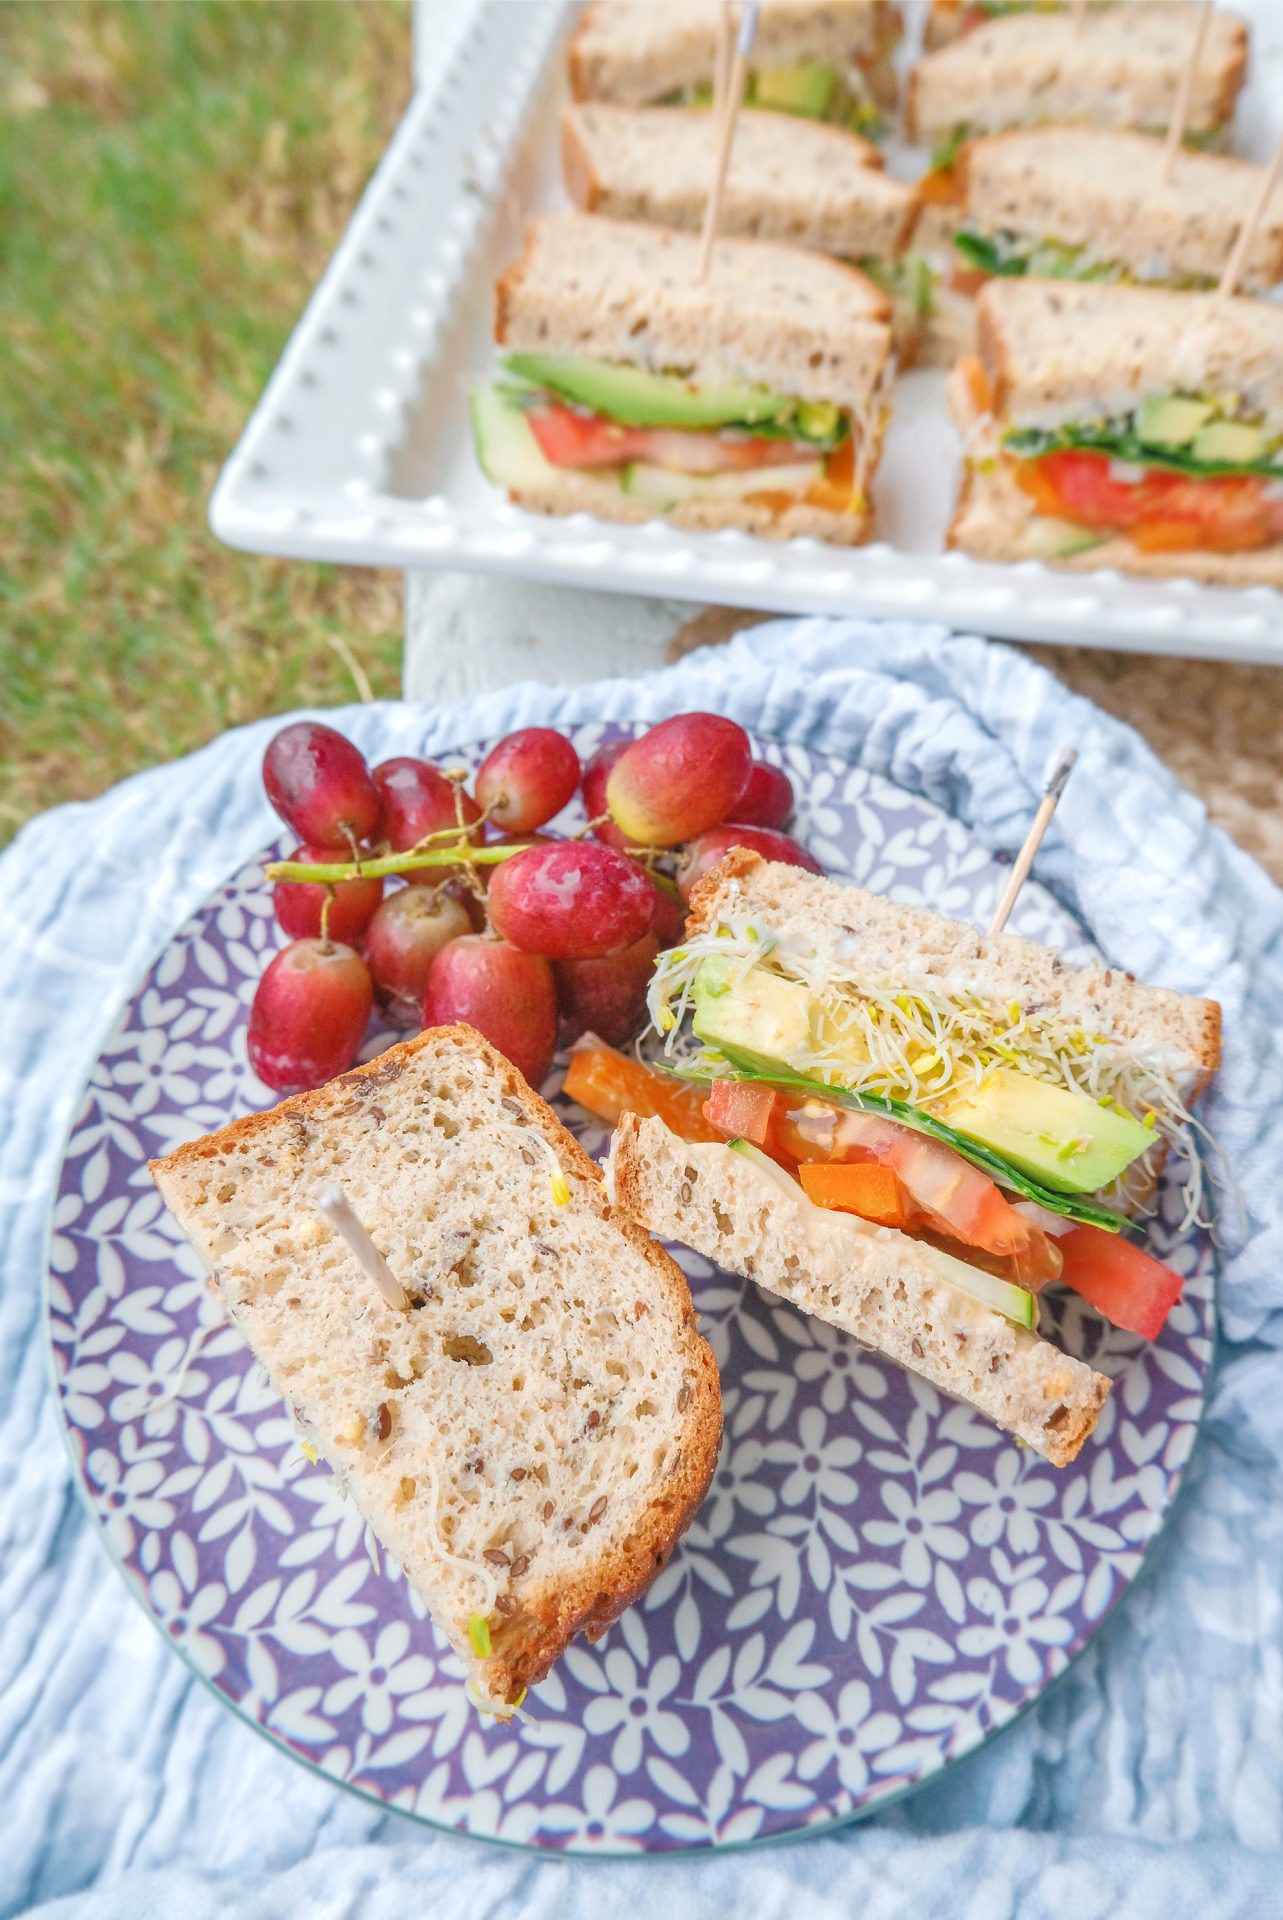 gluten free, plant based, sandwich, dairy free, lunch, vegetable sandwich, picnic, veggie sandwich, grapes, avocado, collard greens, hummus, veganaise, tomatoes, lunch idea, vegan, avocado, sprouts, cucumber, food, healthy eating, eat clean, veggie